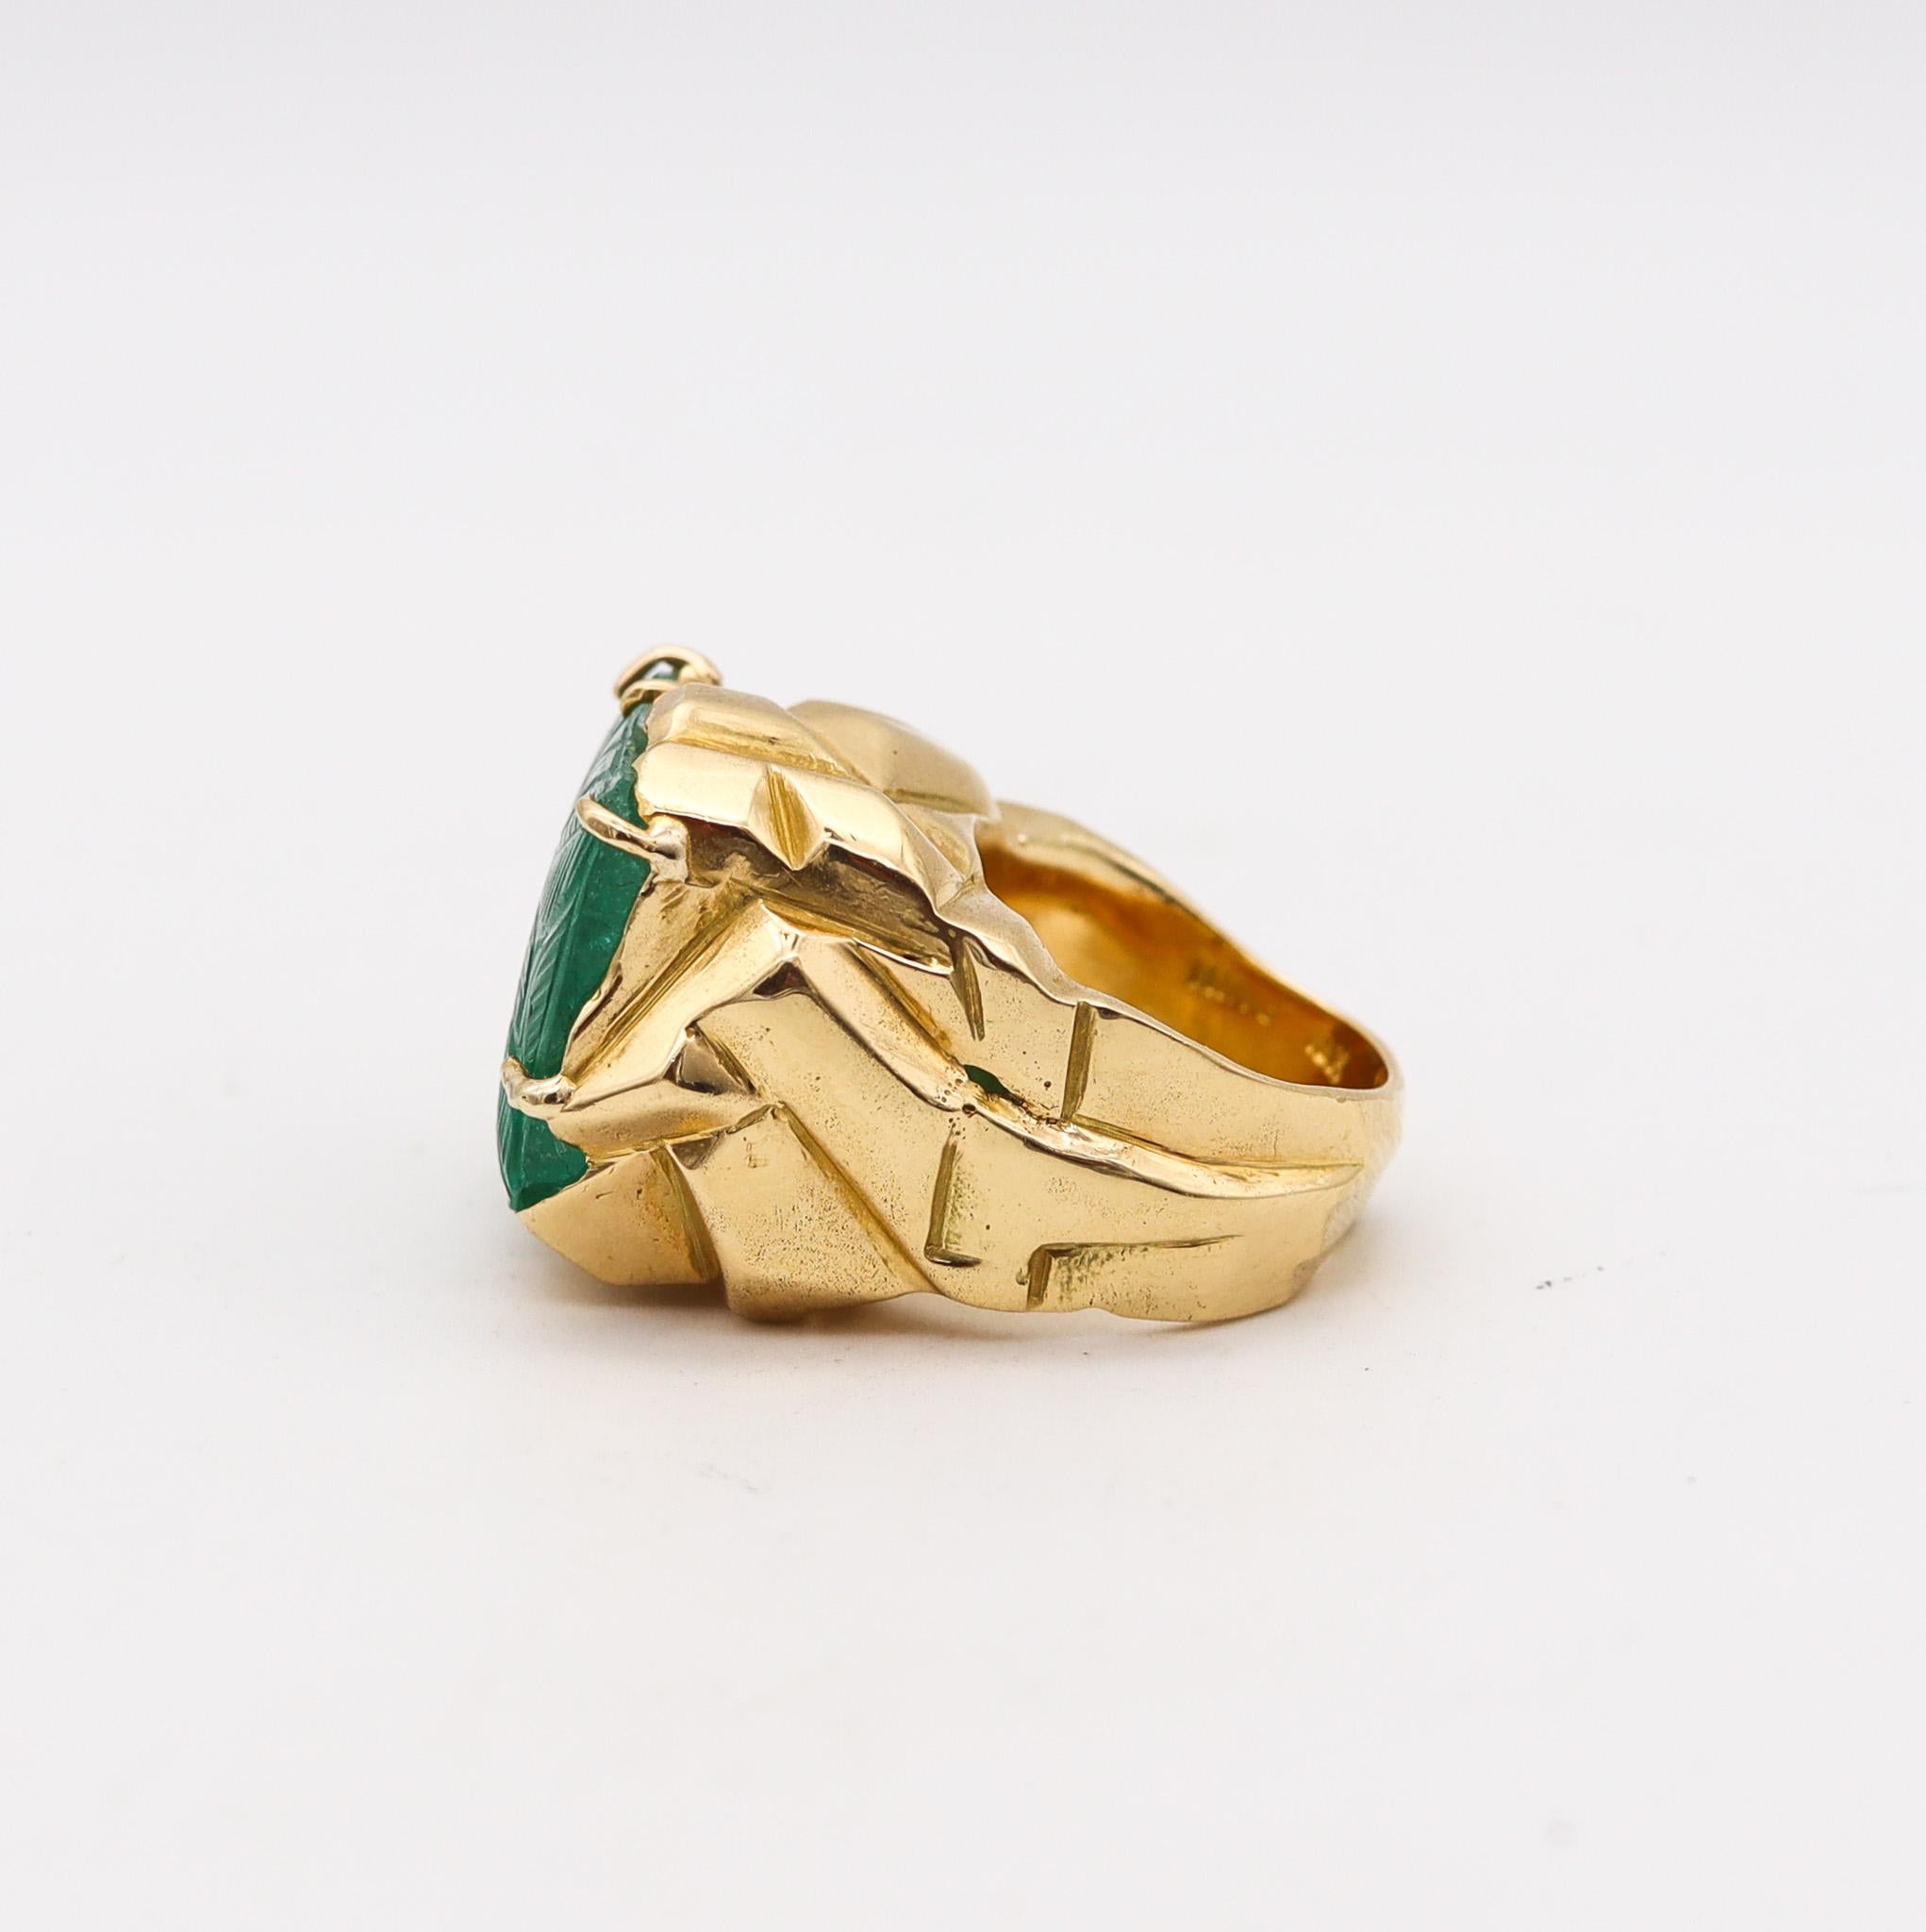 Modernist Arthur King 1970 Geometric Sculptural Ring In 18Kt Gold With 12.45 Cts Emerald For Sale